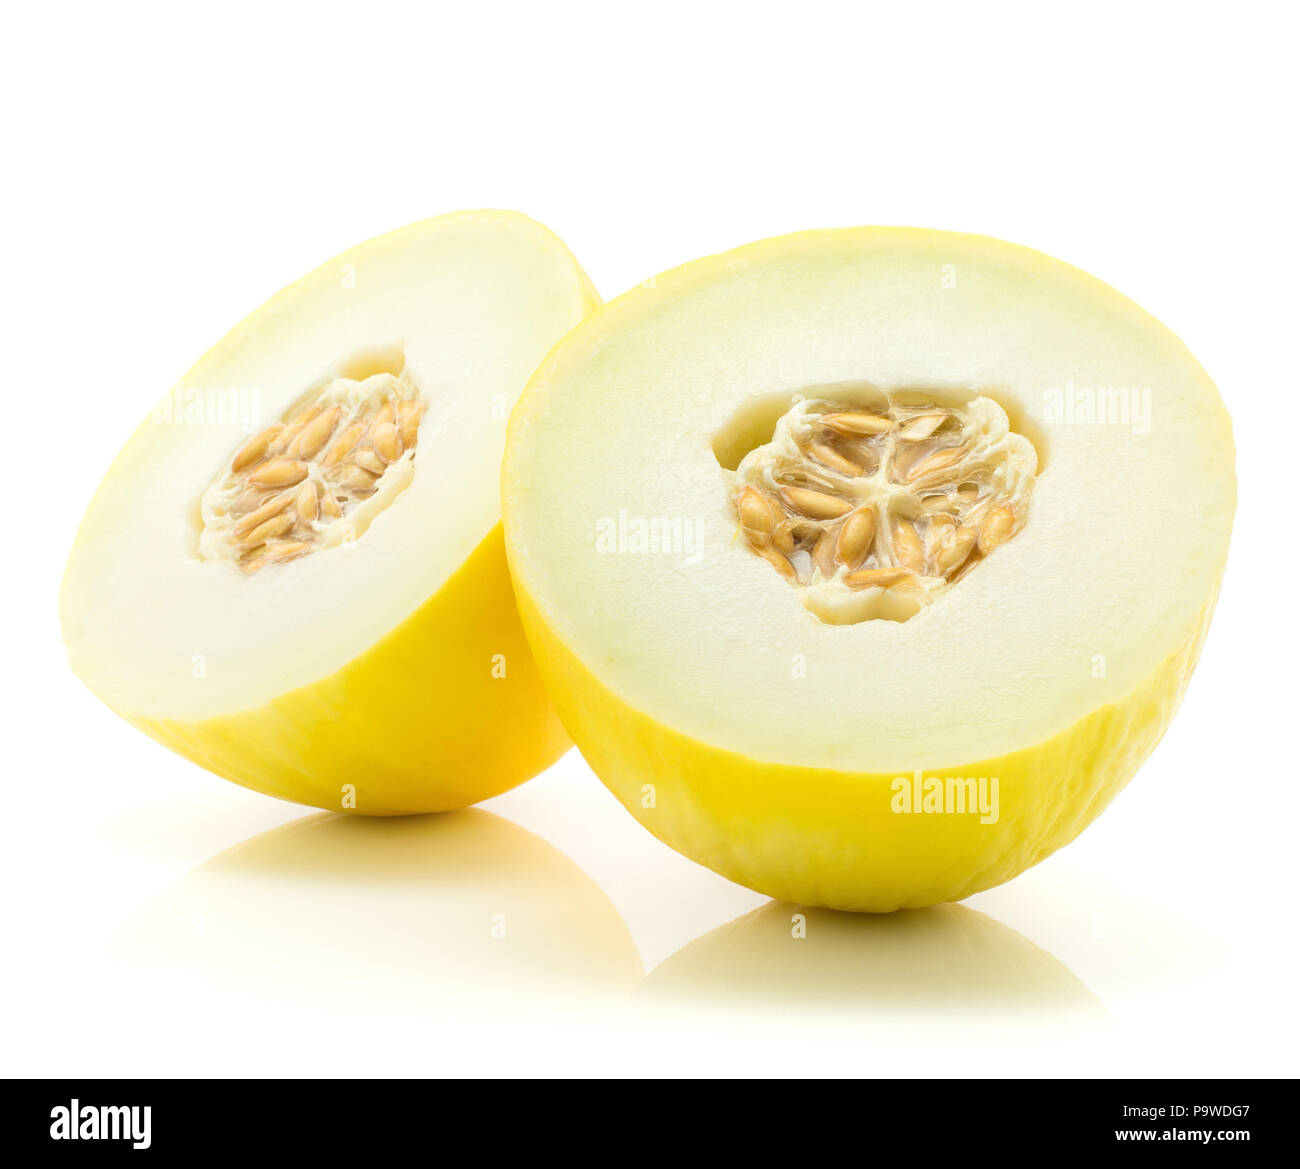 Yellow honeydew melon cut in half isolated on white background two halves with seeds Stock Photo